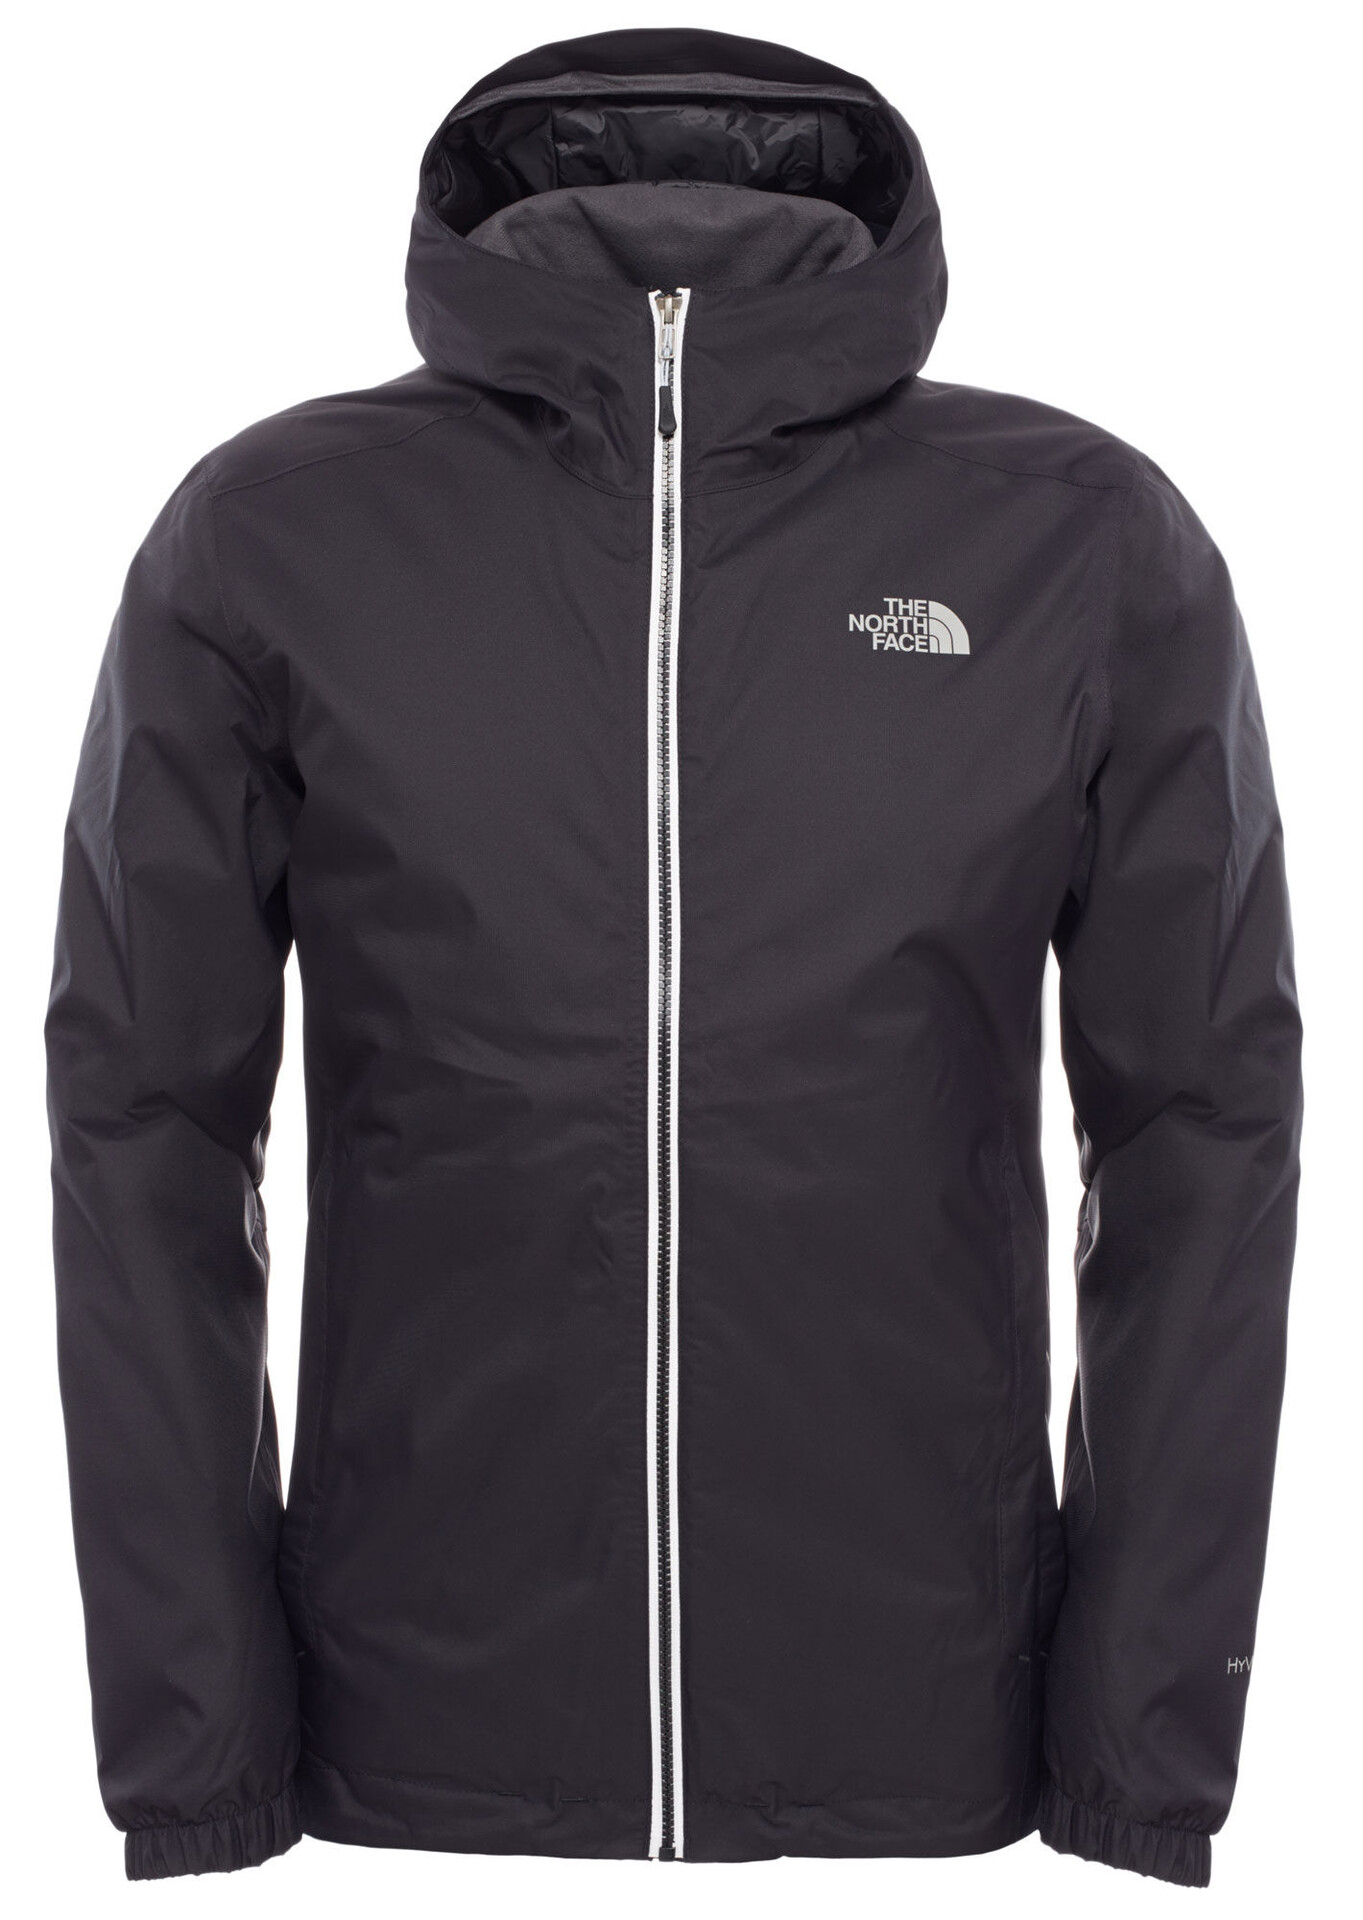 m quest insulated jacket